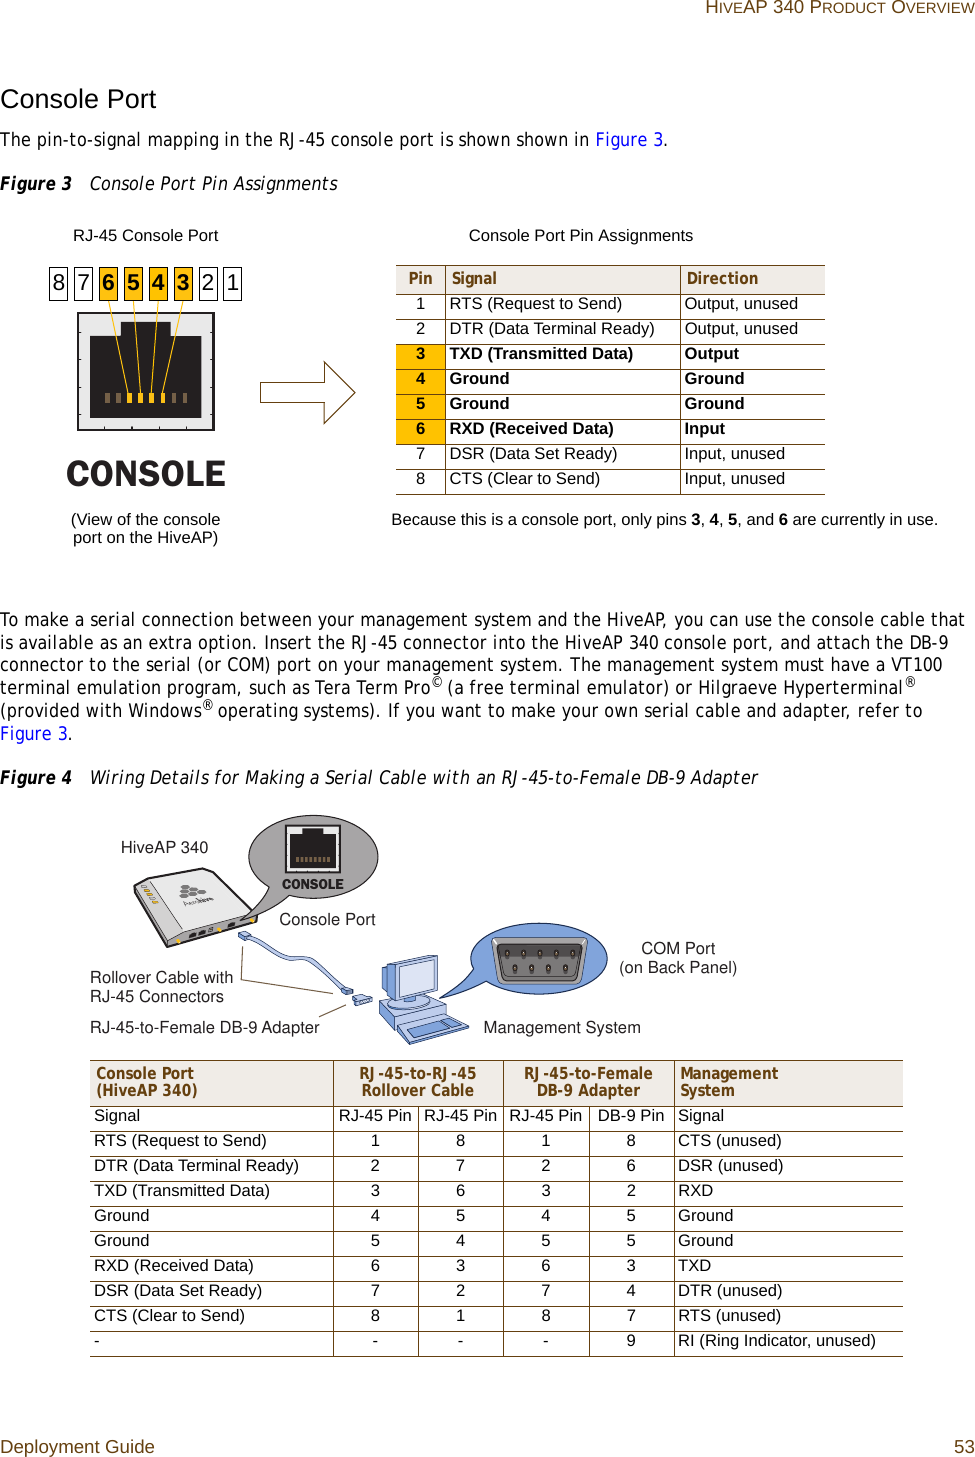 Deployment Guide 53 HIVEAP 340 PRODUCT OVERVIEWConsole PortThe pin-to-signal mapping in the RJ-45 console port is shown shown in Figure 3.Figure 3  Console Port Pin AssignmentsTo make a serial connection between your management system and the HiveAP, you can use the console cable that is available as an extra option. Insert the RJ-45 connector into the HiveAP 340 console port, and attach the DB-9 connector to the serial (or COM) port on your management system. The management system must have a VT100 terminal emulation program, such as Tera Term Pro© (a free terminal emulator) or Hilgraeve Hyperterminal® (provided with Windows® operating systems). If you want to make your own serial cable and adapter, refer to Figure 3.Figure 4  Wiring Details for Making a Serial Cable with an RJ-45-to-Female DB-9 AdapterCONSOLEPin Signal Direction1 RTS (Request to Send) Output, unused2 DTR (Data Terminal Ready) Output, unused3 TXD (Transmitted Data) Output4 Ground Ground5 Ground Ground6 RXD (Received Data) Input7 DSR (Data Set Ready) Input, unused8 CTS (Clear to Send) Input, unusedRJ-45 Console Port(View of the console port on the HiveAP) Because this is a console port, only pins 3, 4, 5, and 6 are currently in use.Console Port Pin Assignments613457 28Rollover Cable with RJ-45 ConnectorsRJ-45-to-Female DB-9 AdapterConsole PortCOM Port (on Back Panel)CONSOLEManagement SystemHiveAP 340Console Port (HiveAP 340) RJ-45-to-RJ-45 Rollover Cable RJ-45-to-Female DB-9 Adapter Management SystemSignal RJ-45 Pin RJ-45 Pin RJ-45 Pin DB-9 Pin SignalRTS (Request to Send) 1 8 1 8 CTS (unused)DTR (Data Terminal Ready) 2 7 2 6 DSR (unused)TXD (Transmitted Data) 3 6 3 2 RXDGround 4 5 4 5 GroundGround 5 4 5 5 GroundRXD (Received Data) 6 3 6 3 TXDDSR (Data Set Ready) 7 2 7 4 DTR (unused)CTS (Clear to Send) 8 1 8 7 RTS (unused)- - - - 9 RI (Ring Indicator, unused)